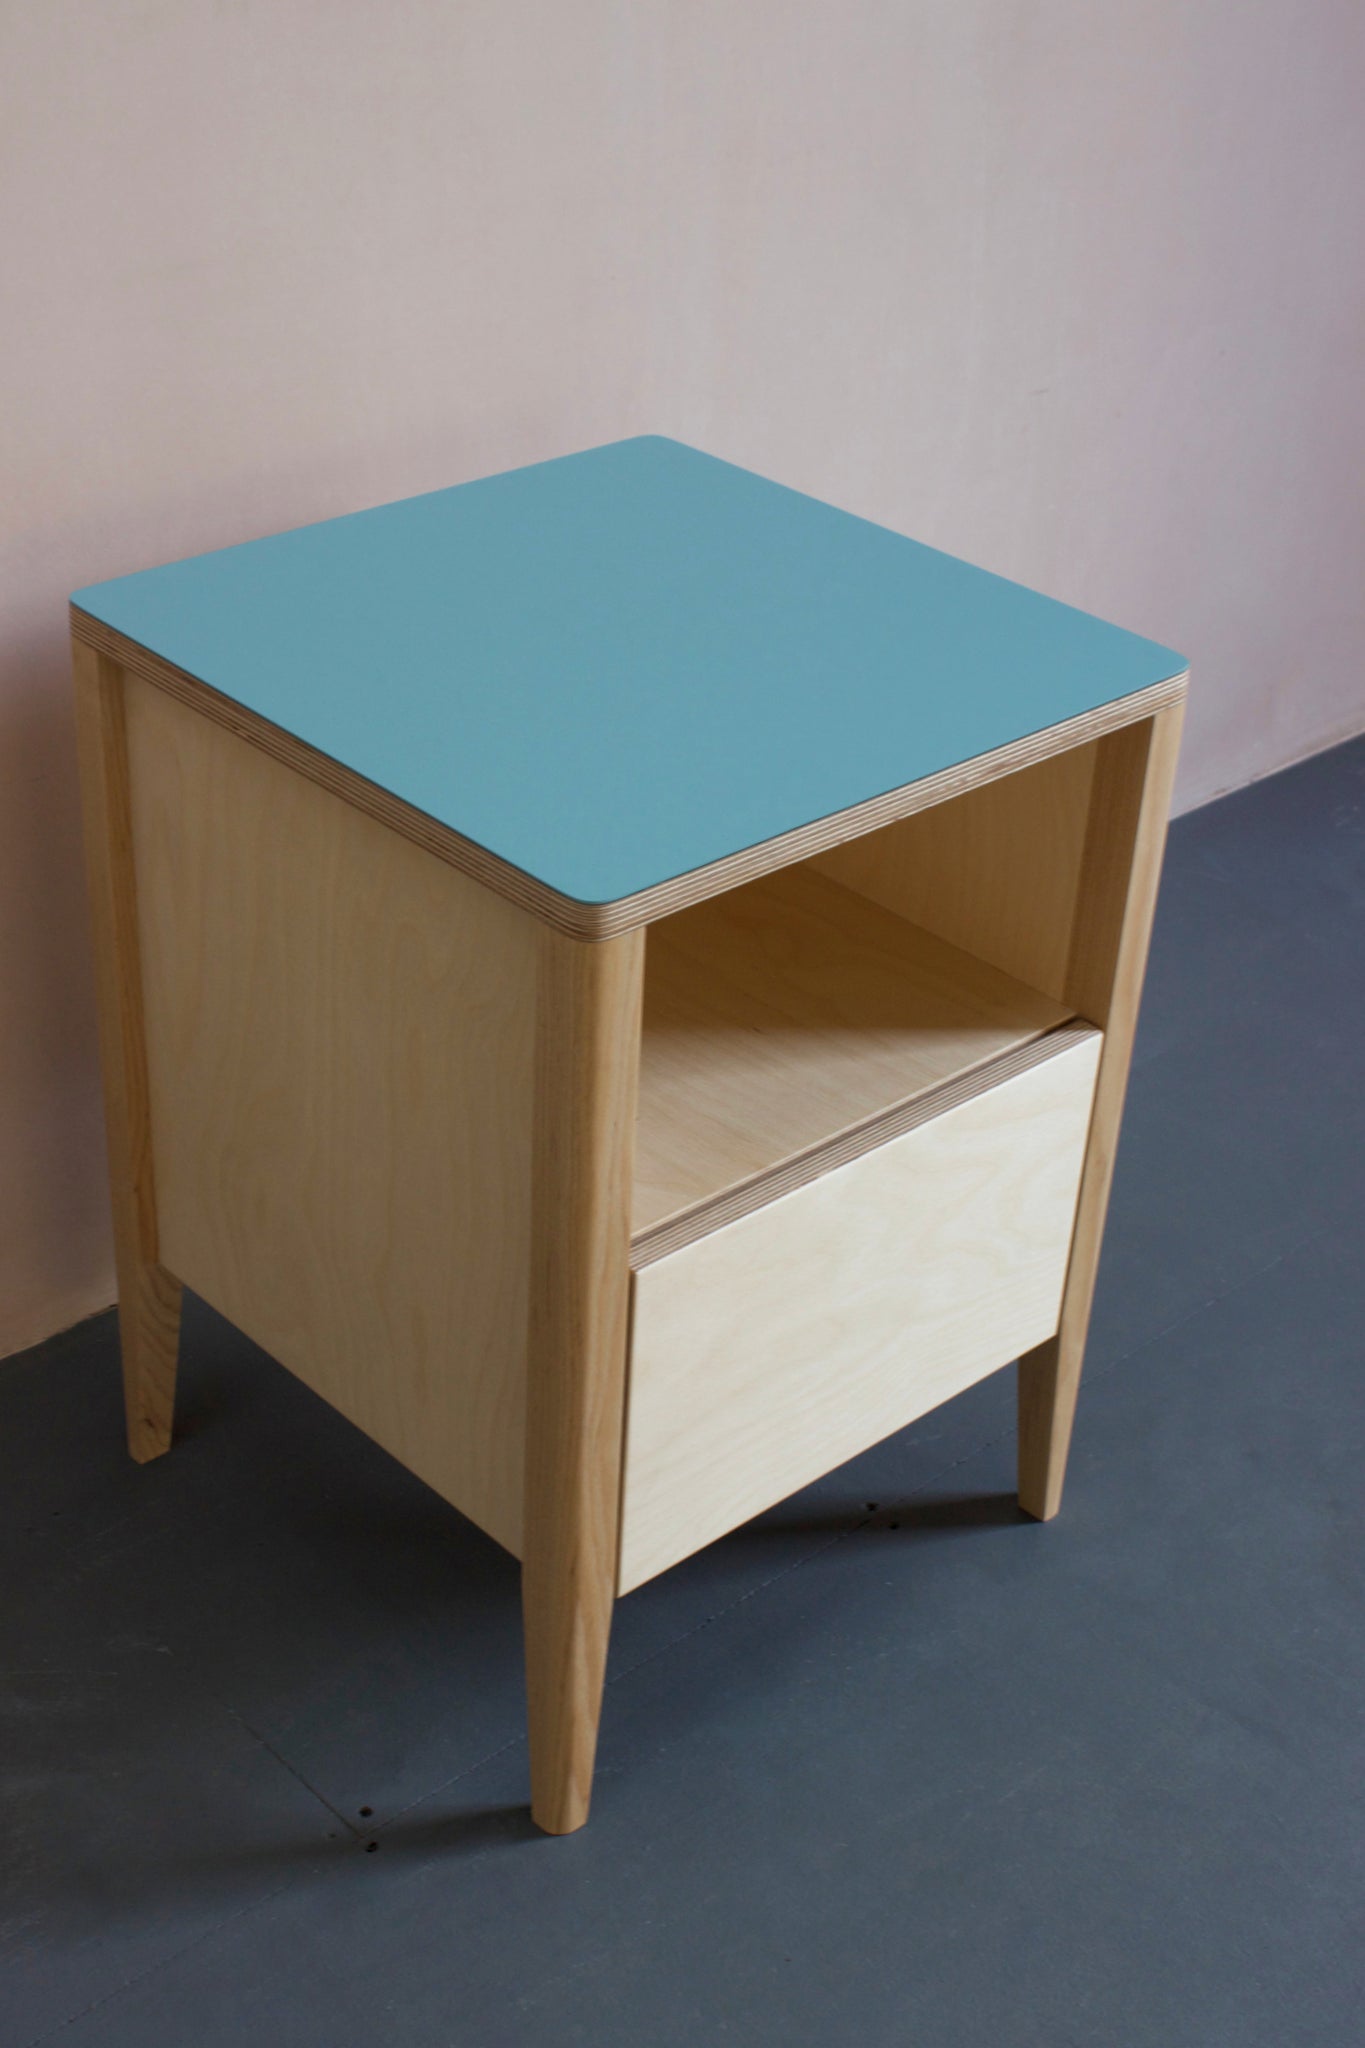 Handmade bedside table, perfect for a modern home. It features Forbo lino top with plywood carcass and solid ash legs. Made by Jon Grant London in Leyton, East London.